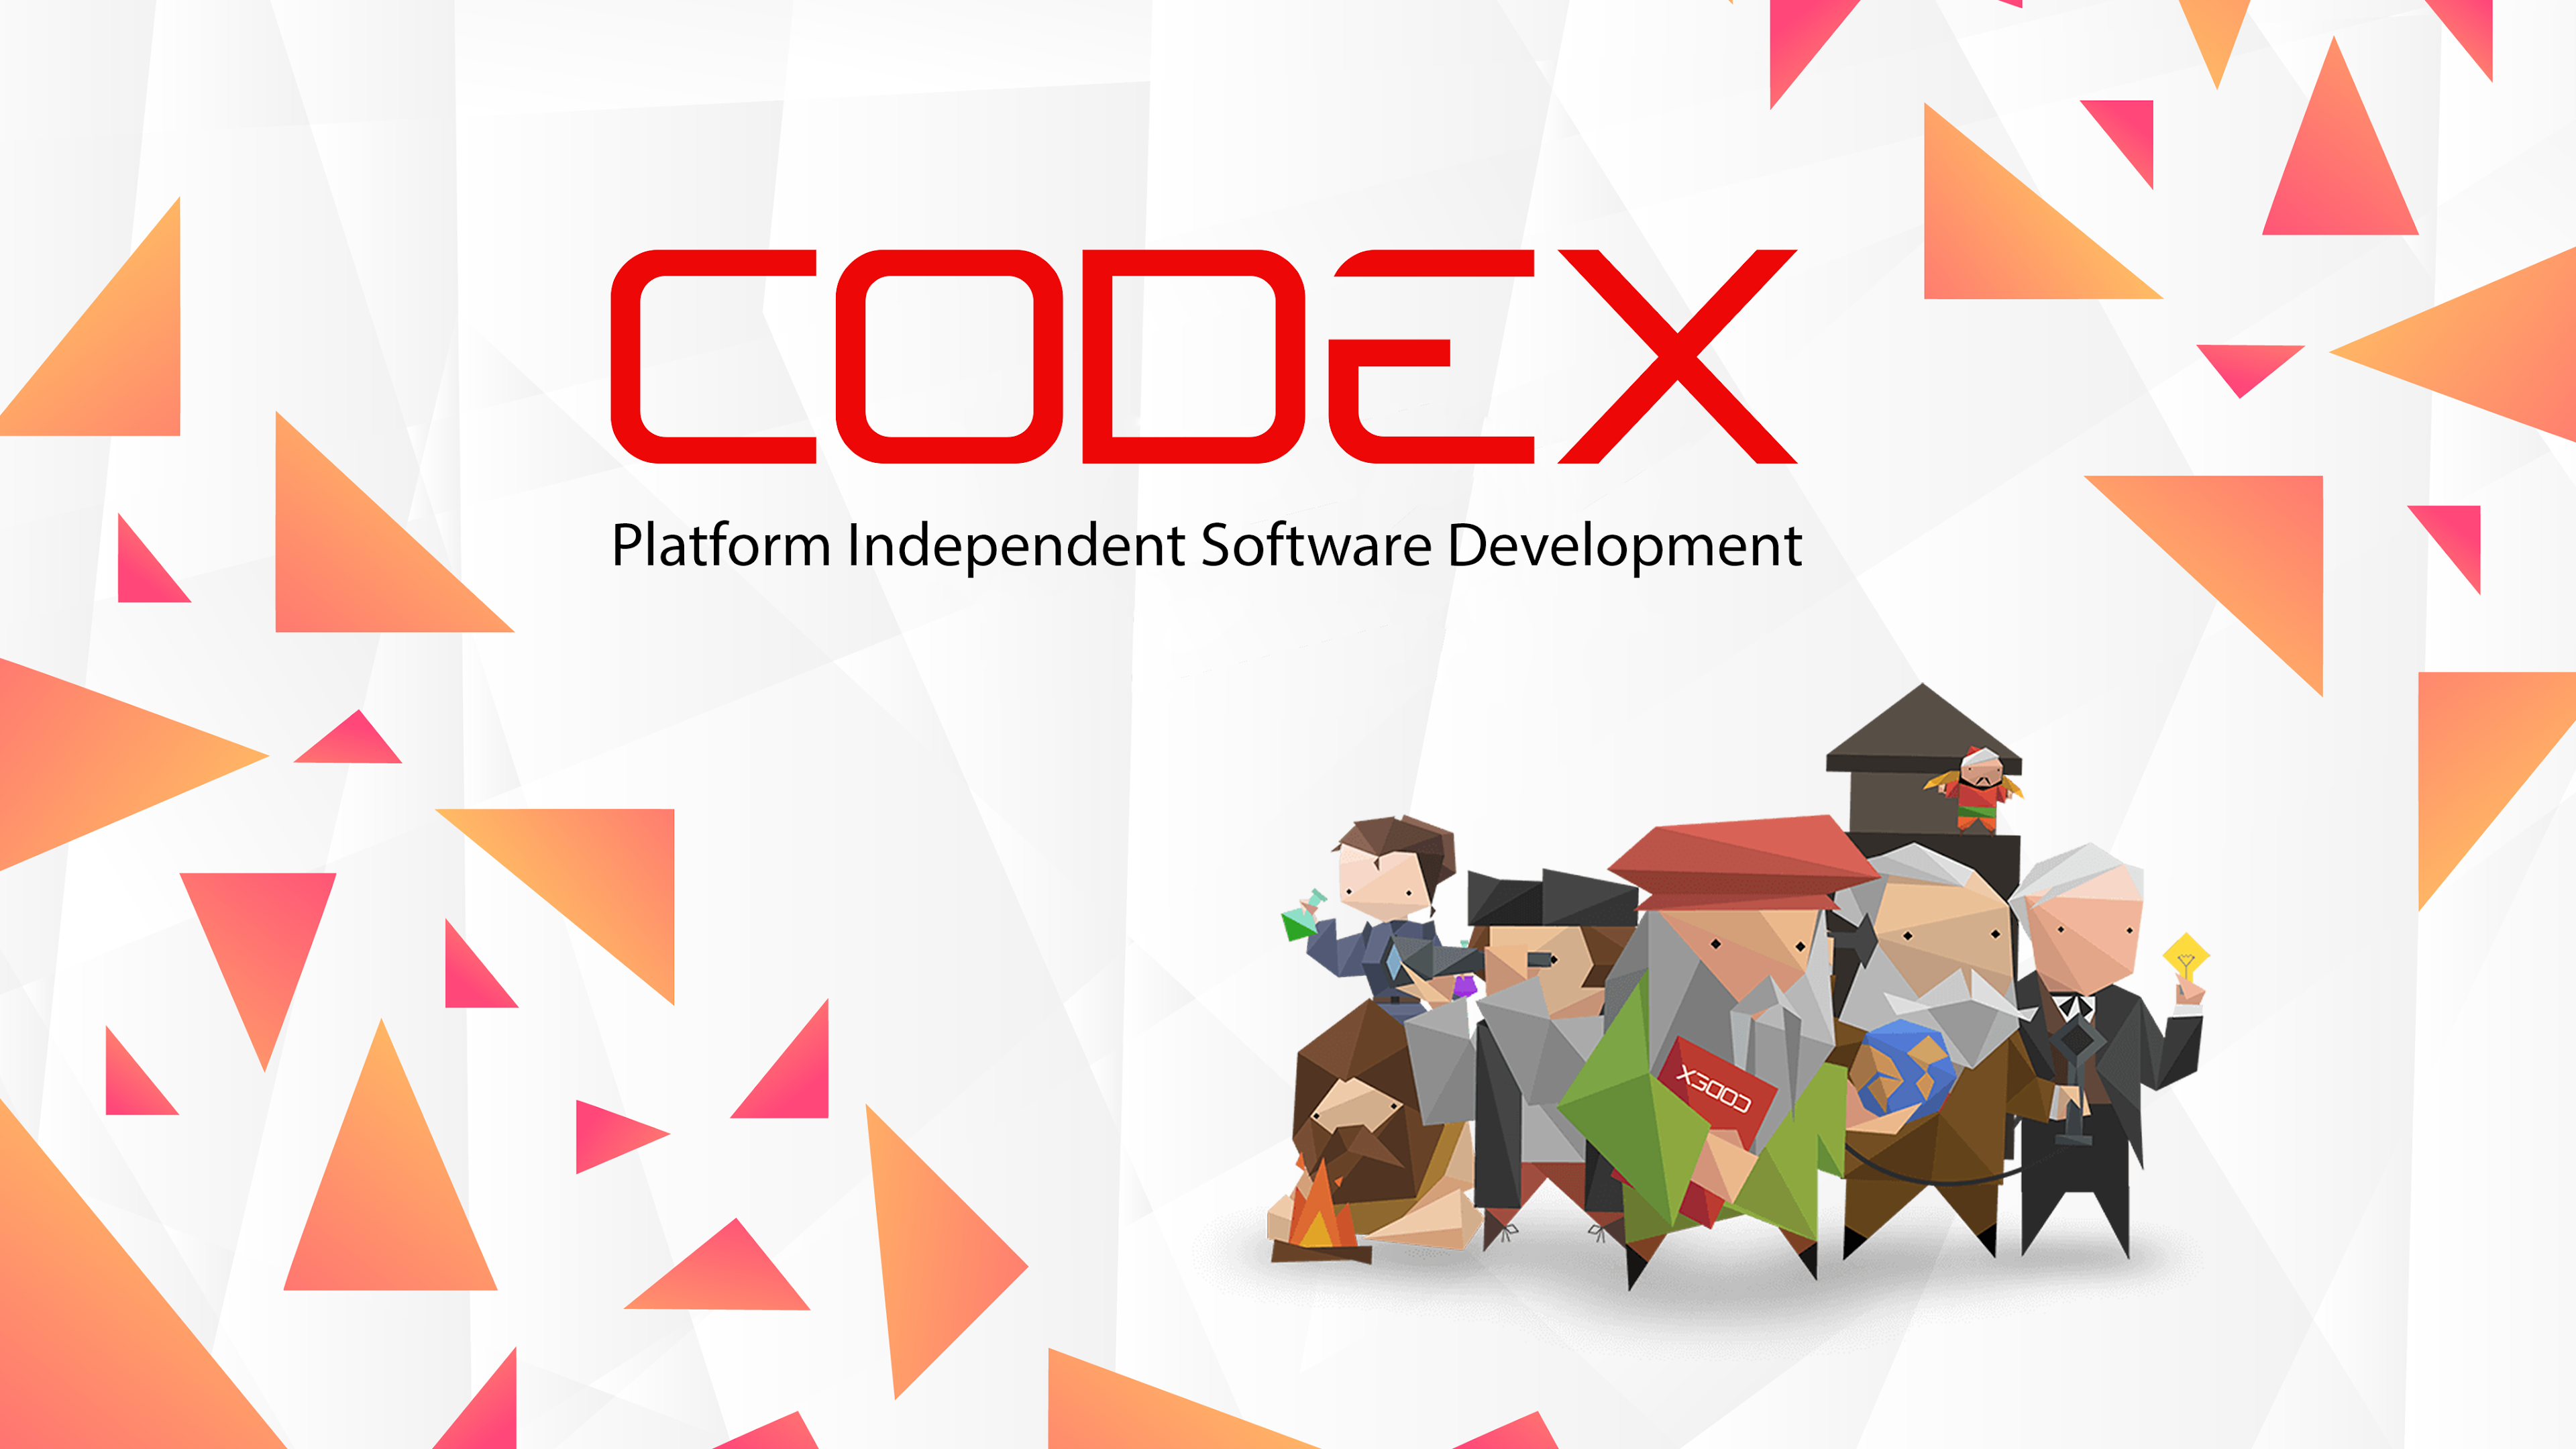 Android Apps by Codex7 Games on Google Play